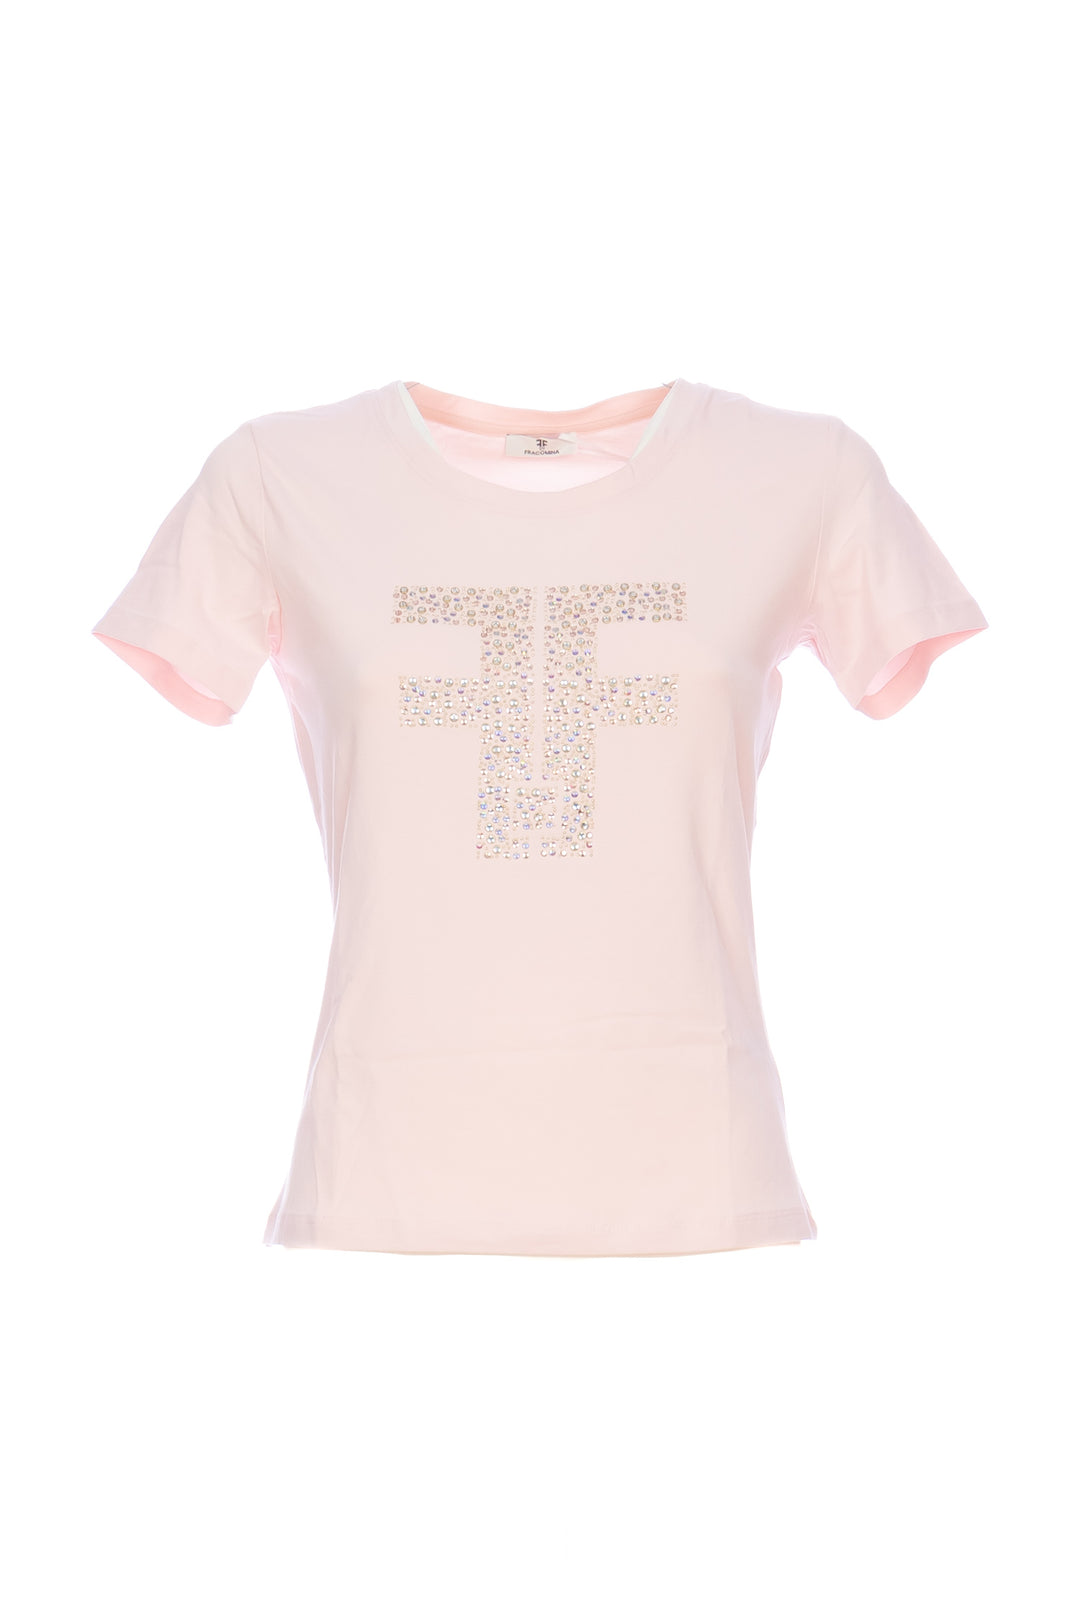 FRACOMINA T-shirt regular rosa in jersey stretch con strass - Mancinelli 1954